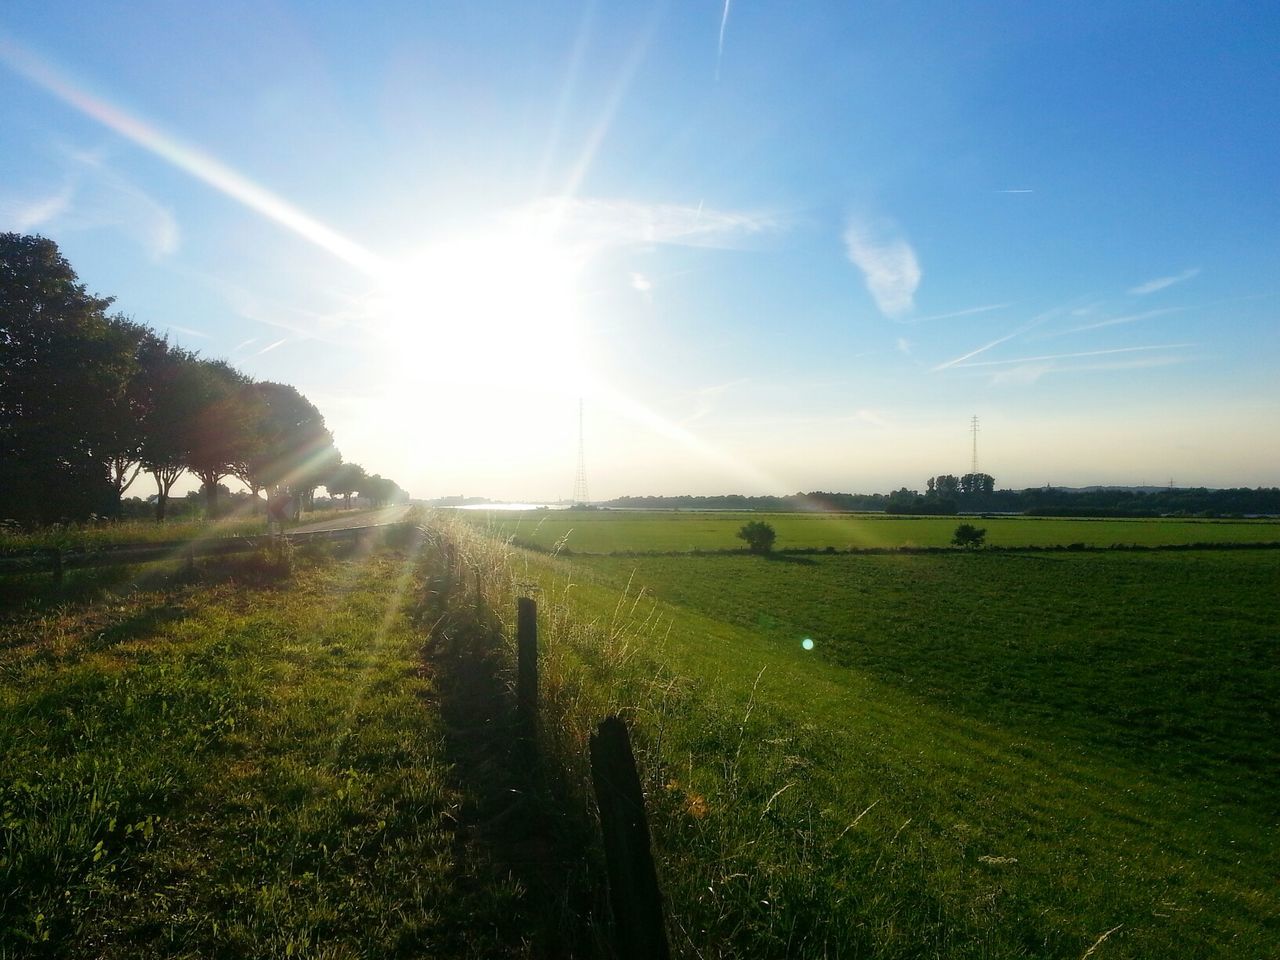 grass, sun, field, landscape, sunlight, sunbeam, sky, rural scene, grassy, tranquility, tranquil scene, lens flare, nature, green color, blue, scenics, beauty in nature, sunny, growth, agriculture